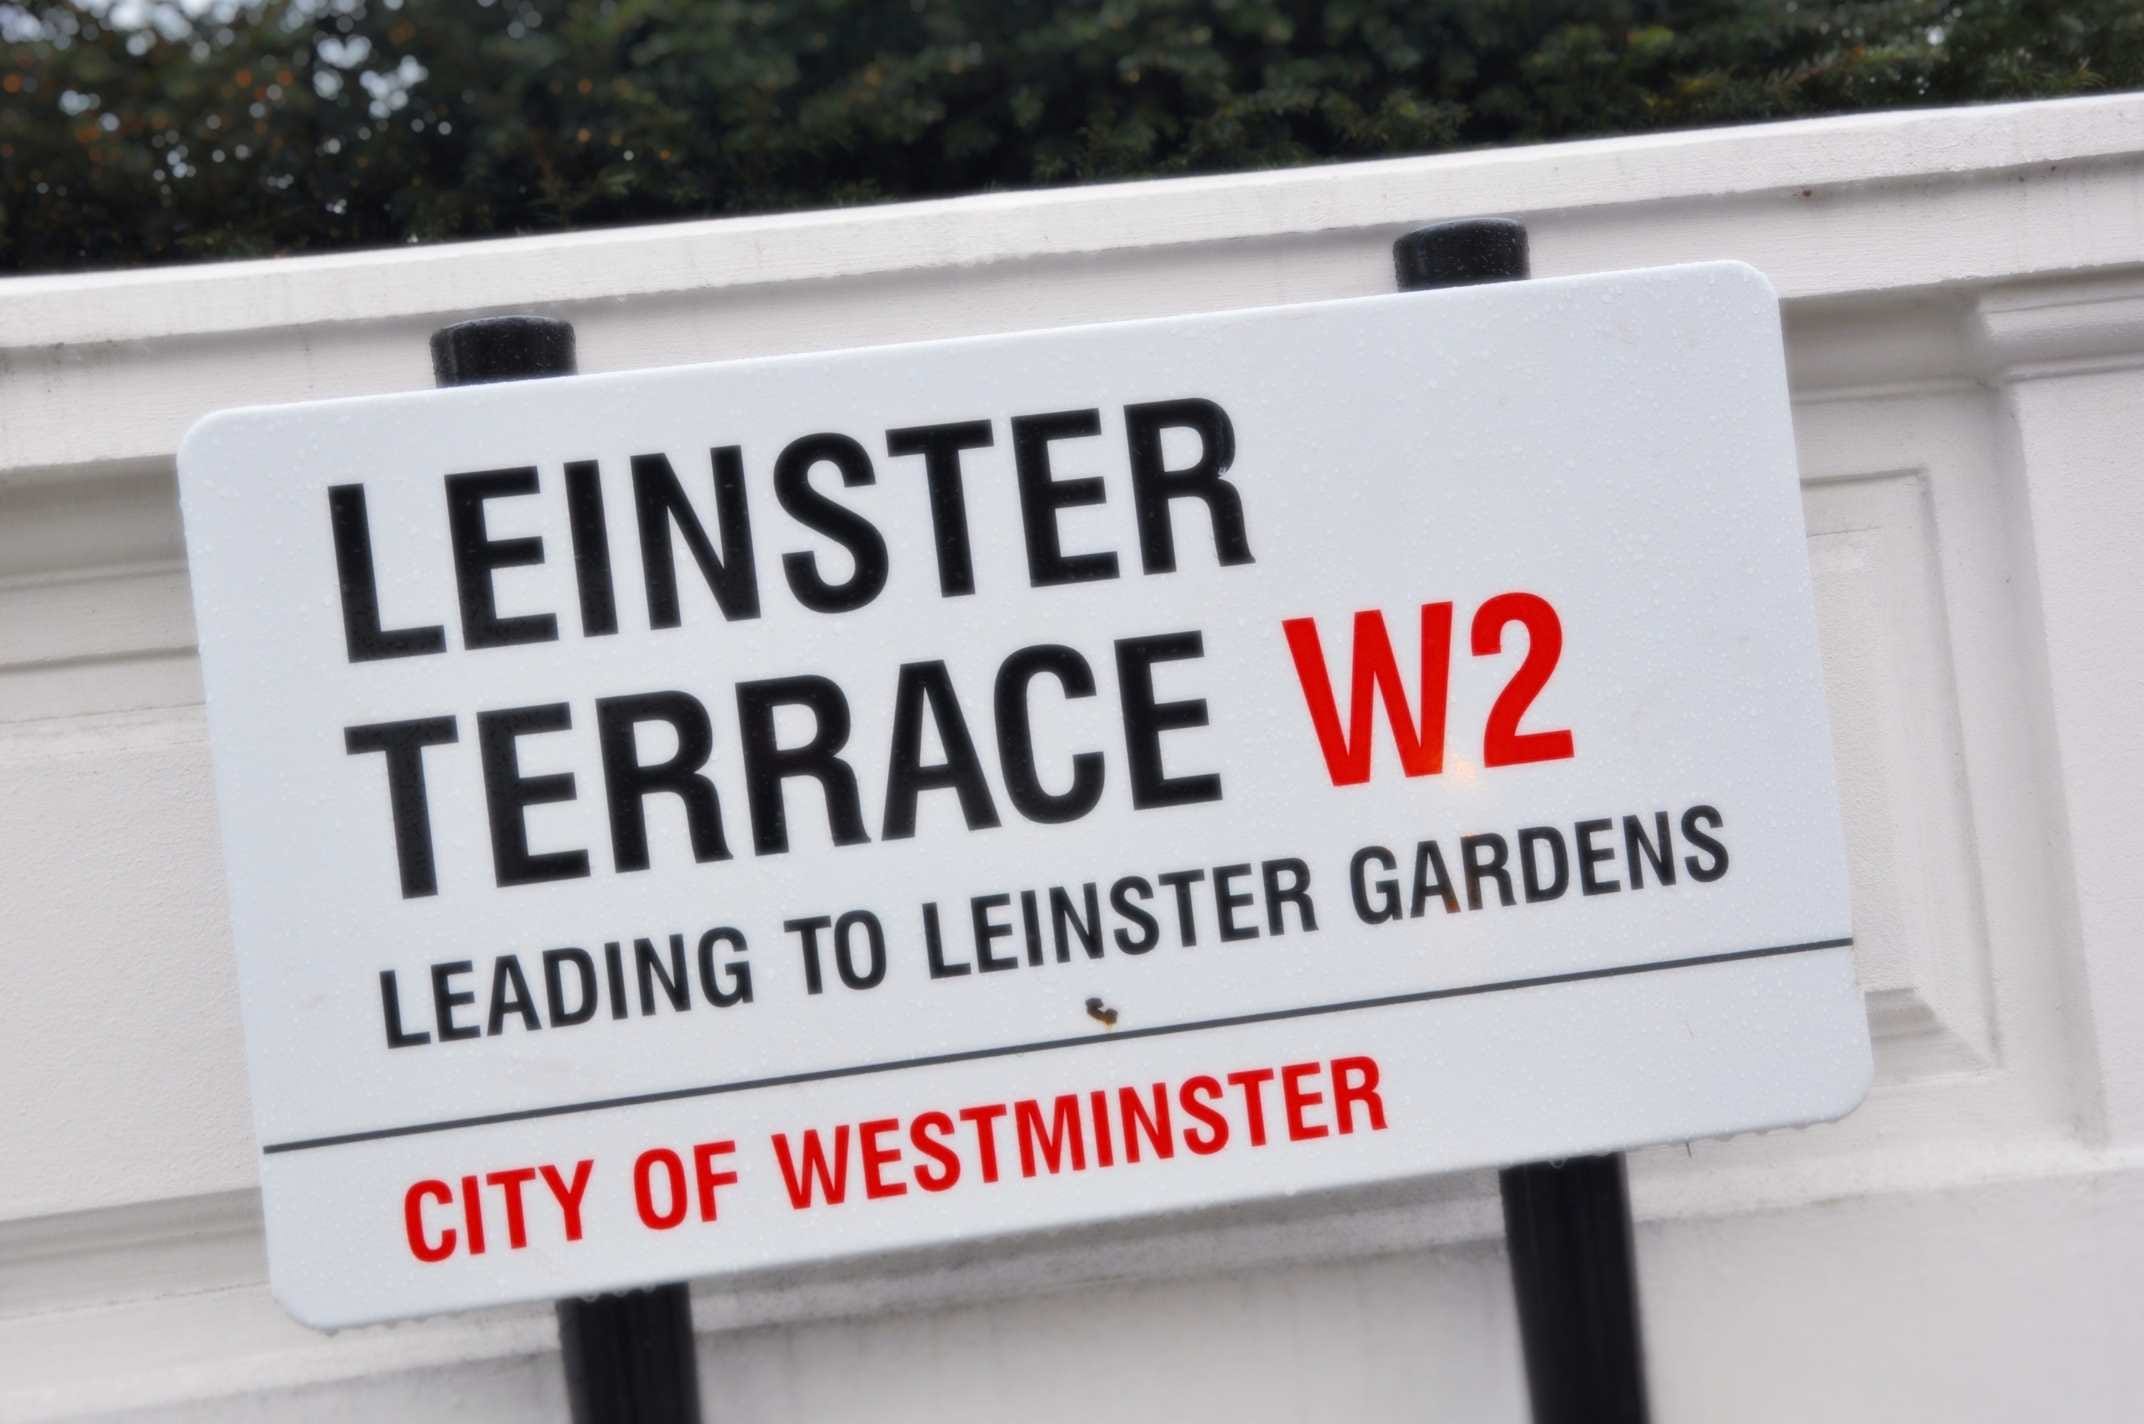 Leinster Terrace sign, London, W2